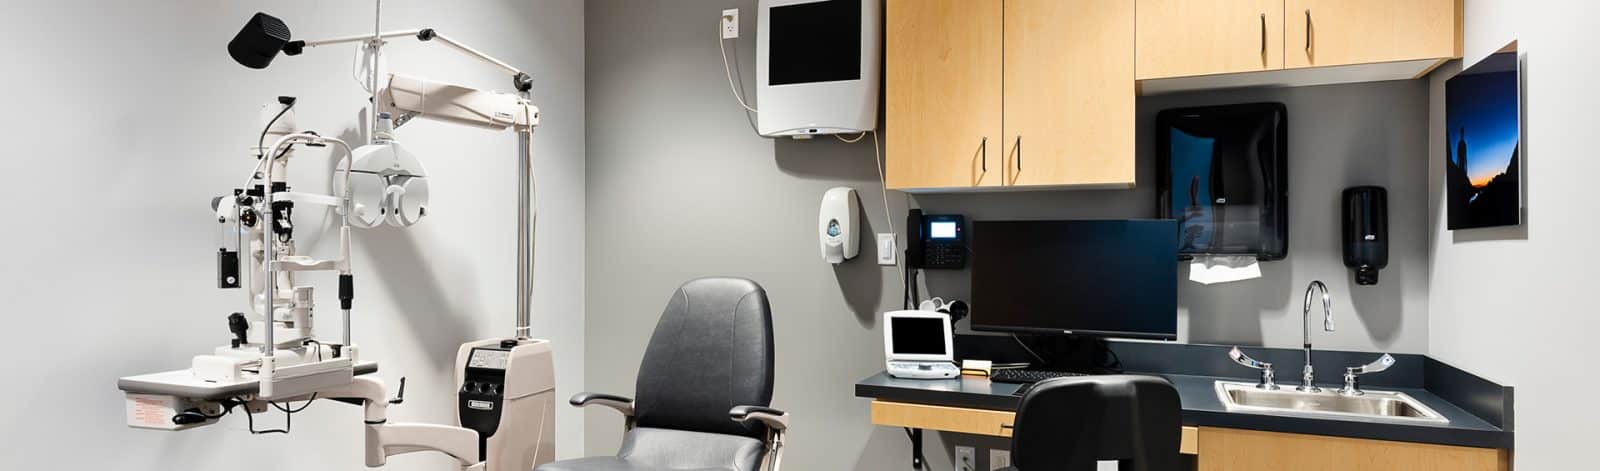 Essential Electrical Systems for Healthcare Facilities